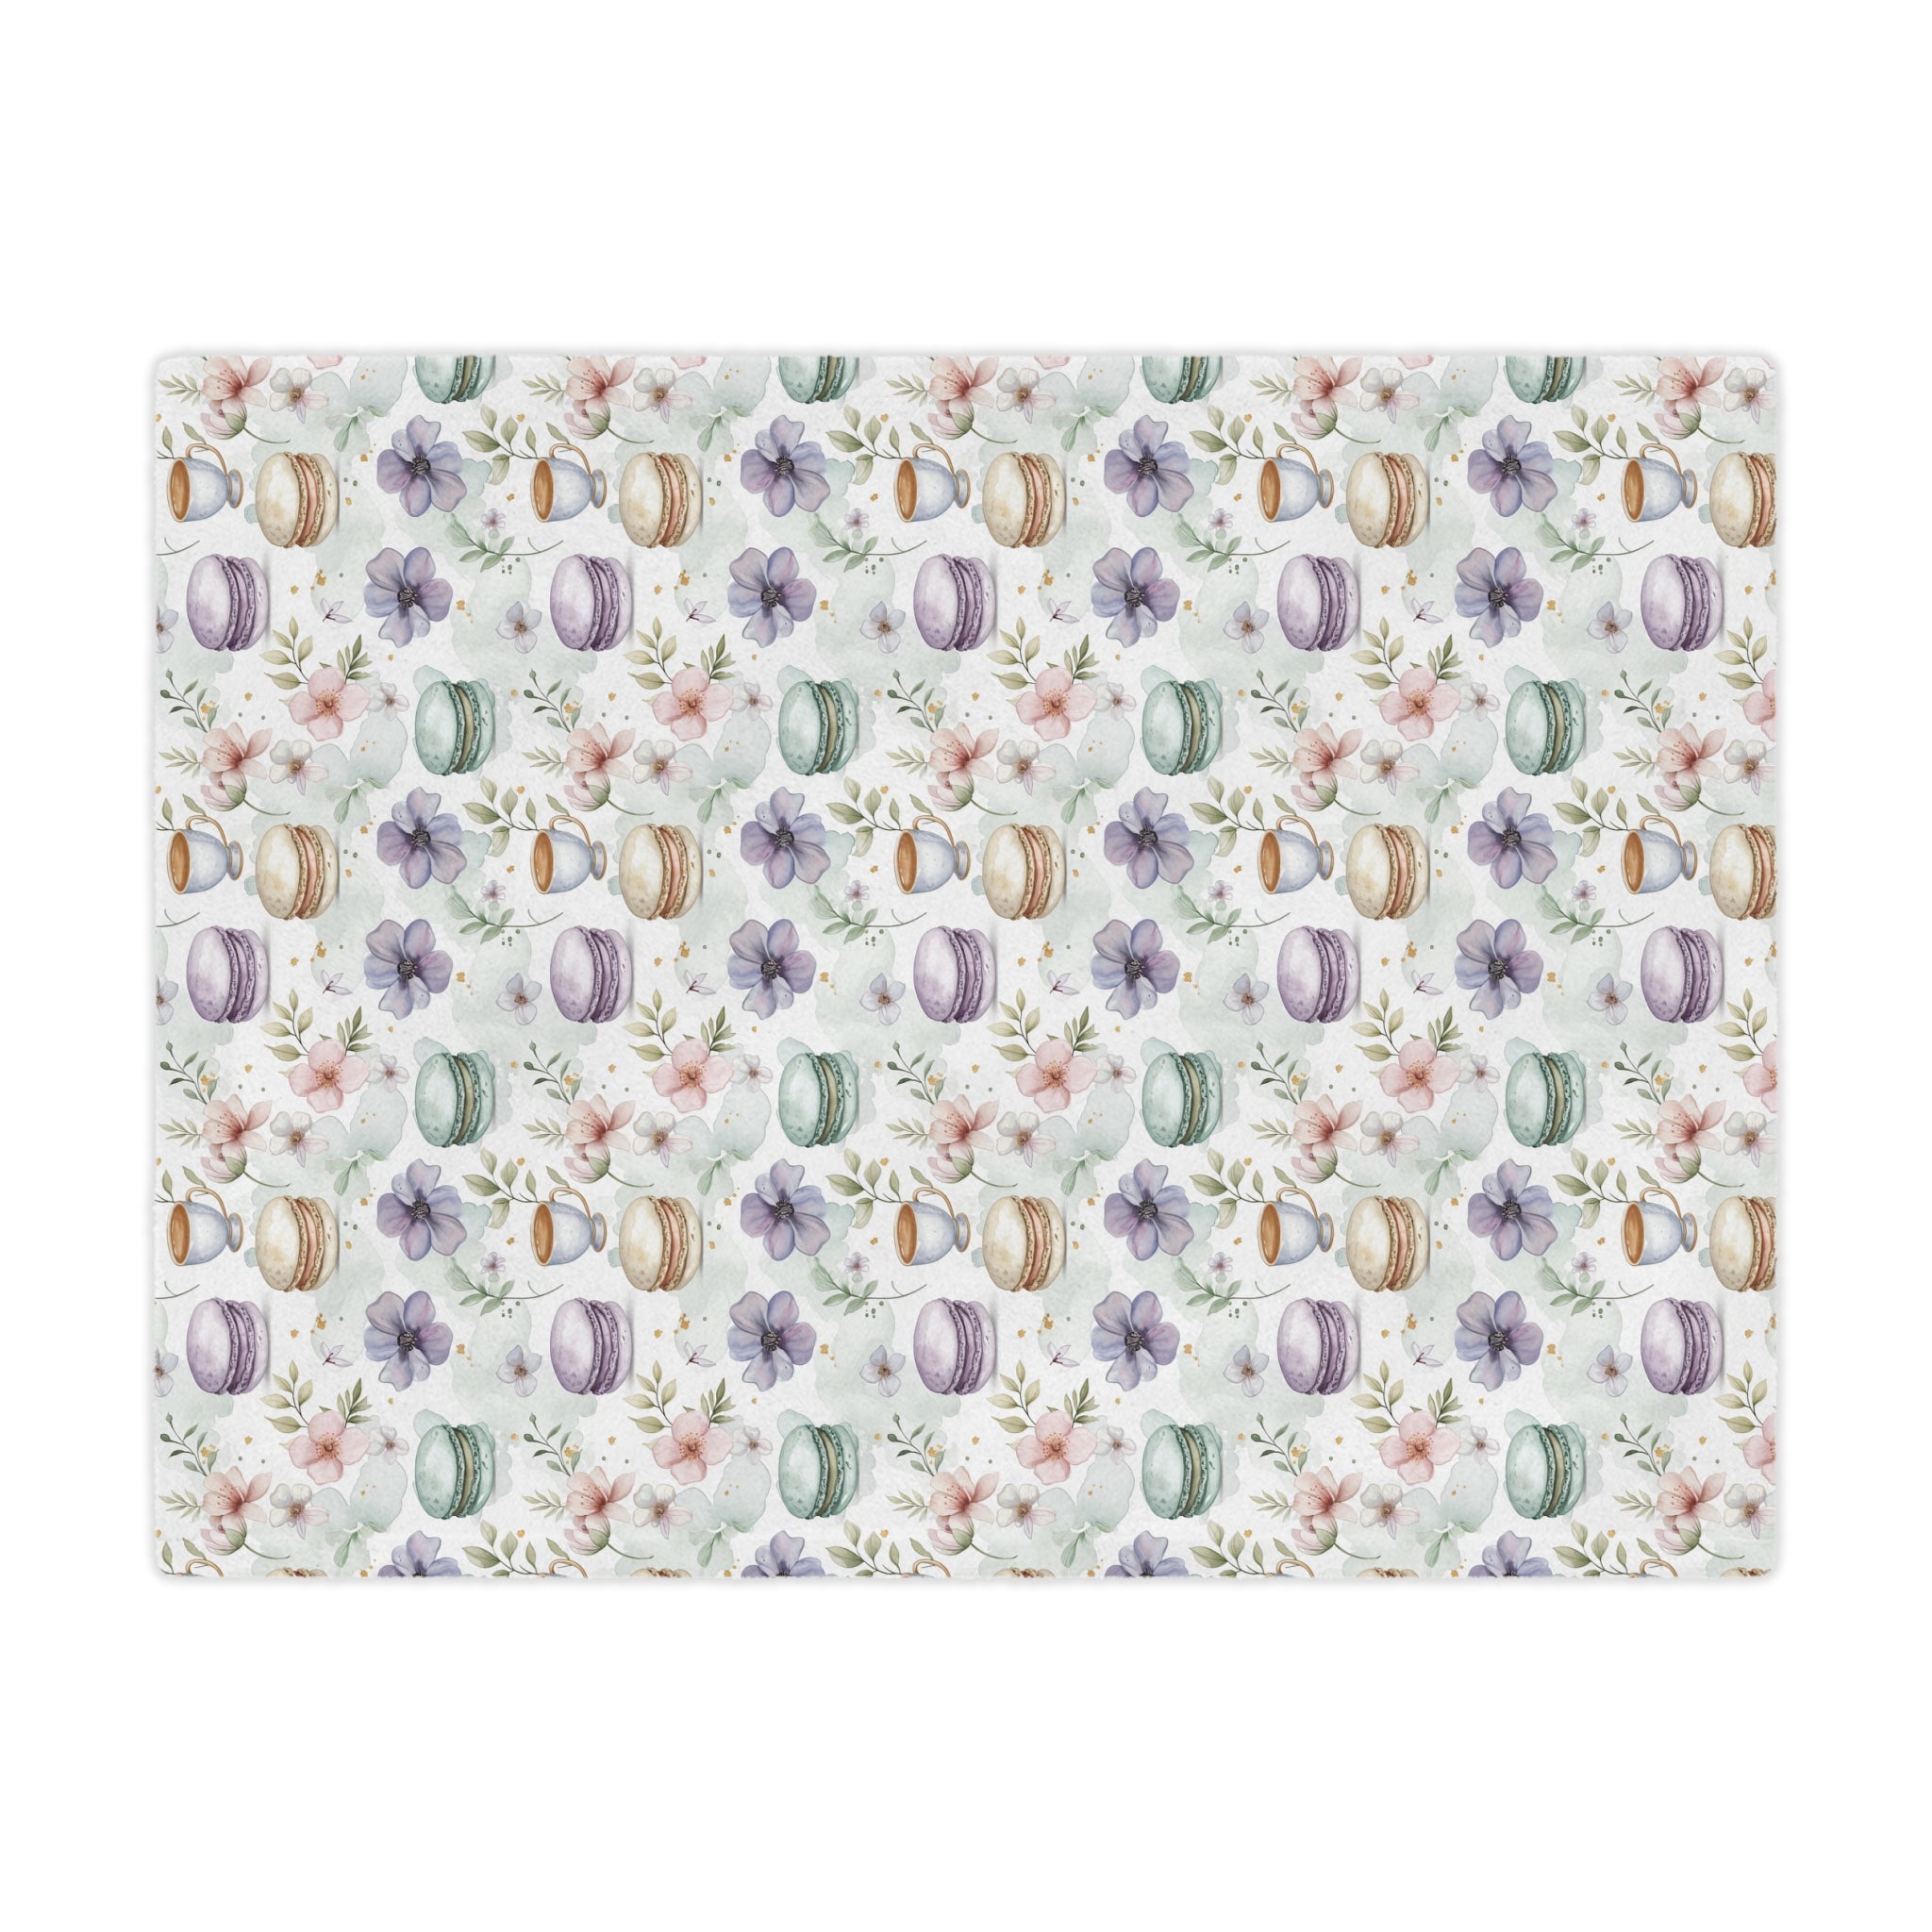 Cozy Up in Sweet Style: Macaroon Rain and Tea Pattern Cute Microfiber Blanket For Pastry Lovers and Foodies With a Sense of Humor and Style